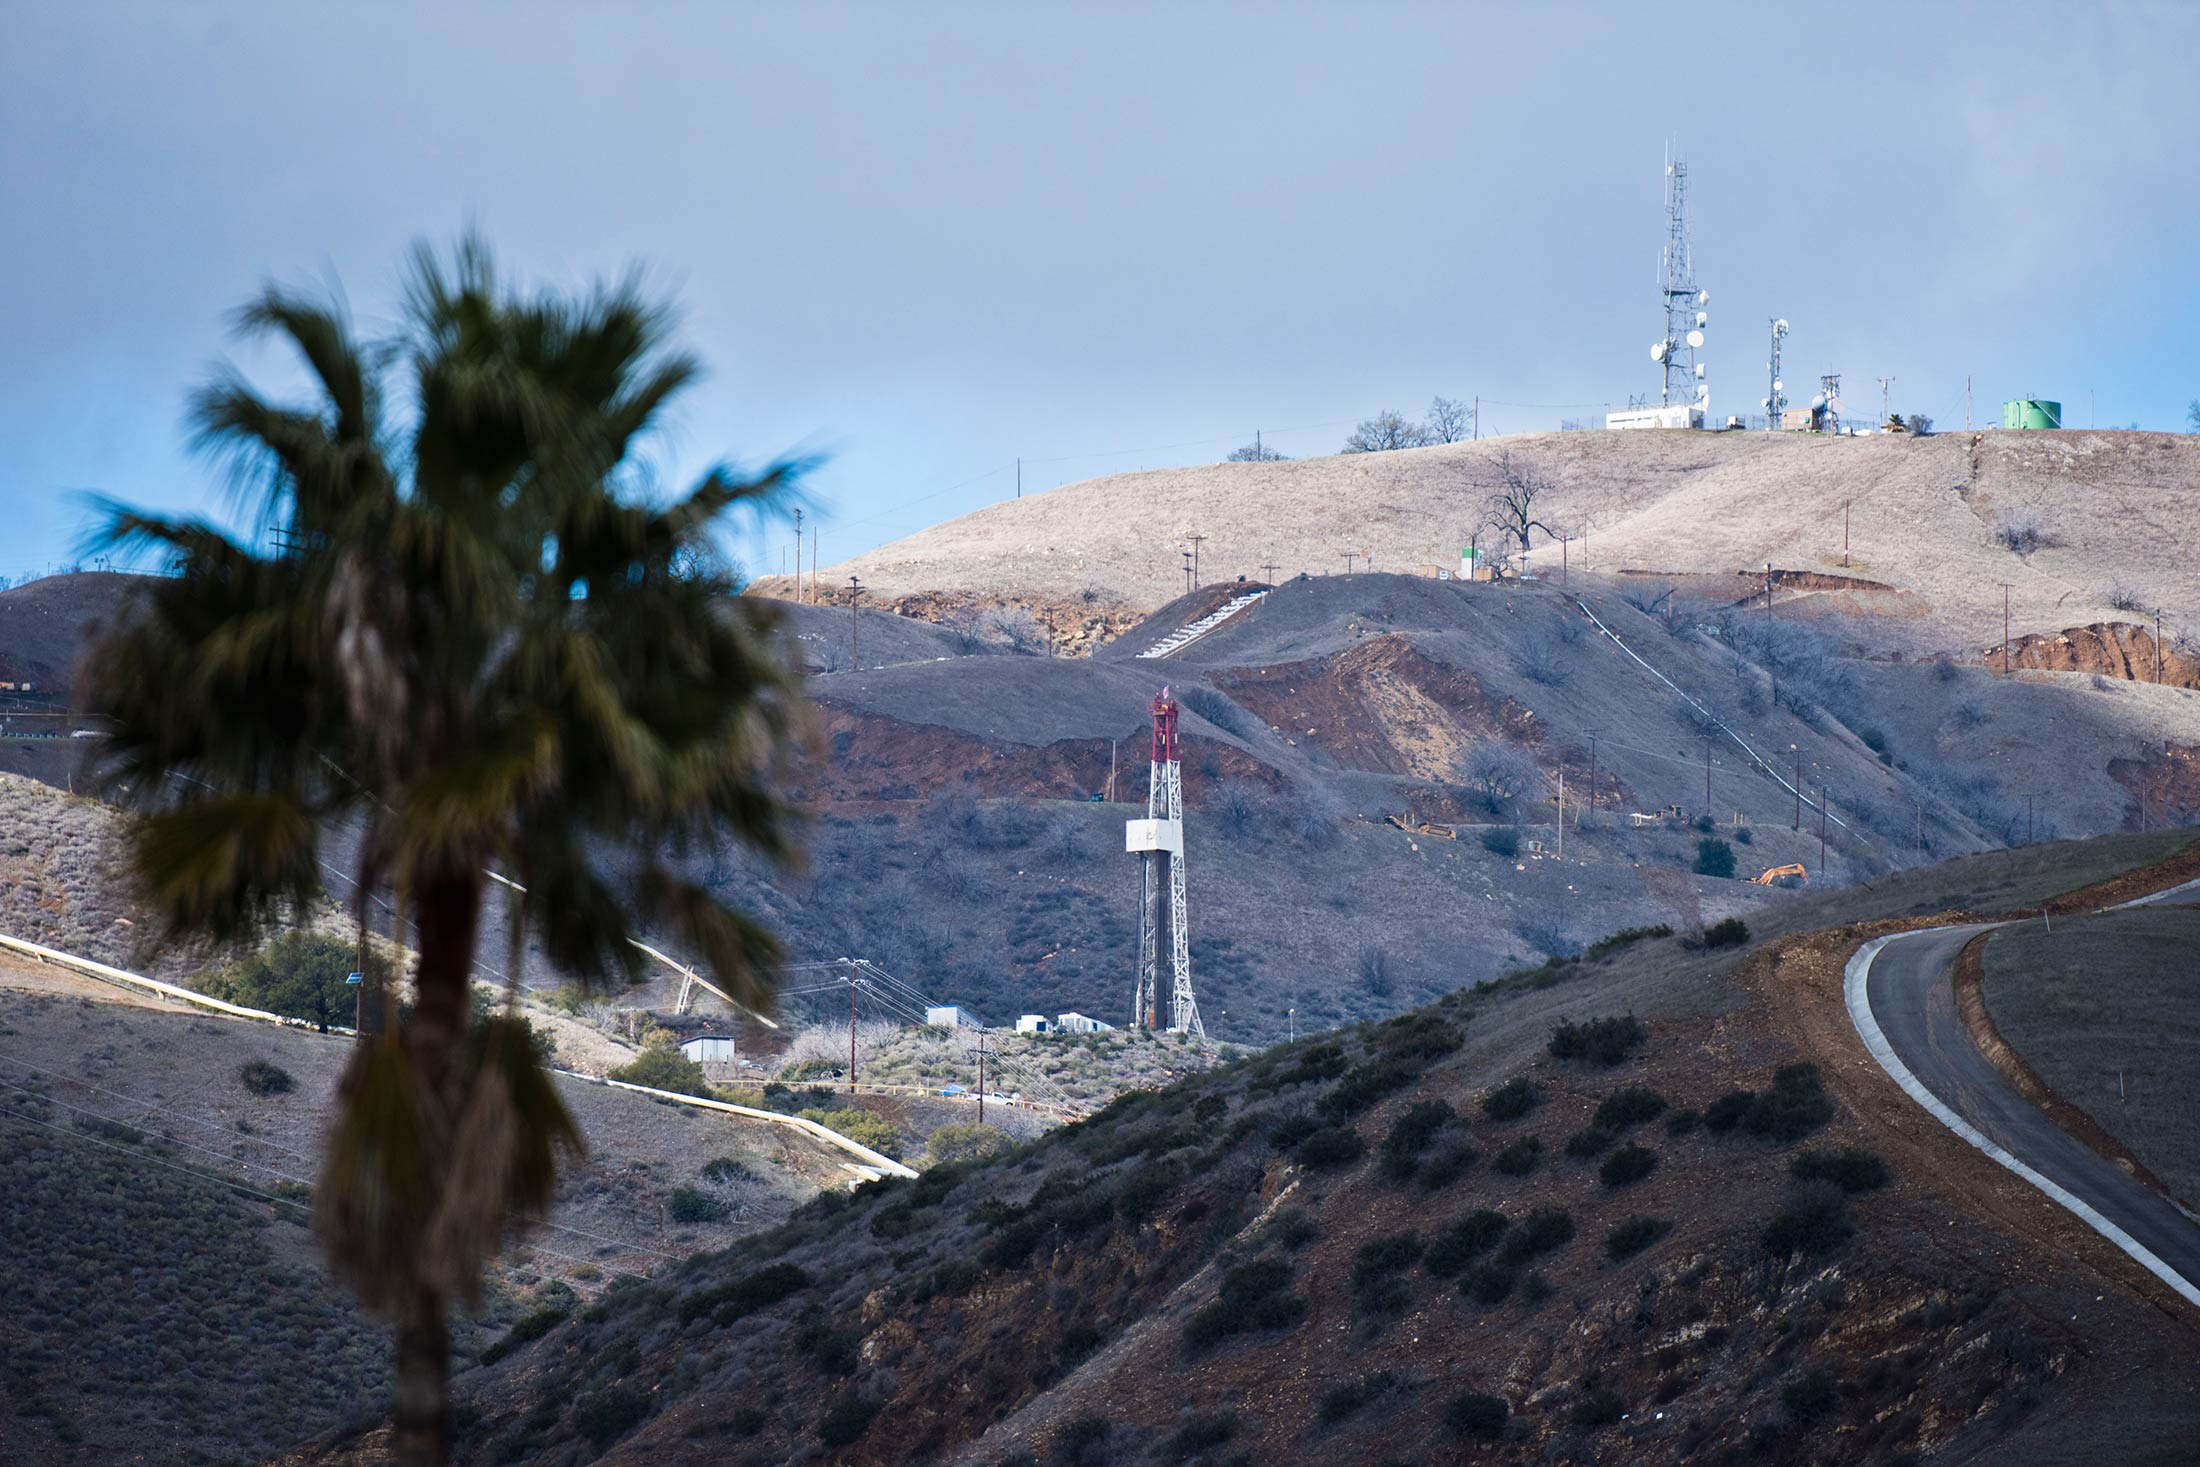 A Southern California Gas Company facility which has been leaking natural gas since October, in the foothills above above the affluent Porter Ranch suburb of Los Angeles.